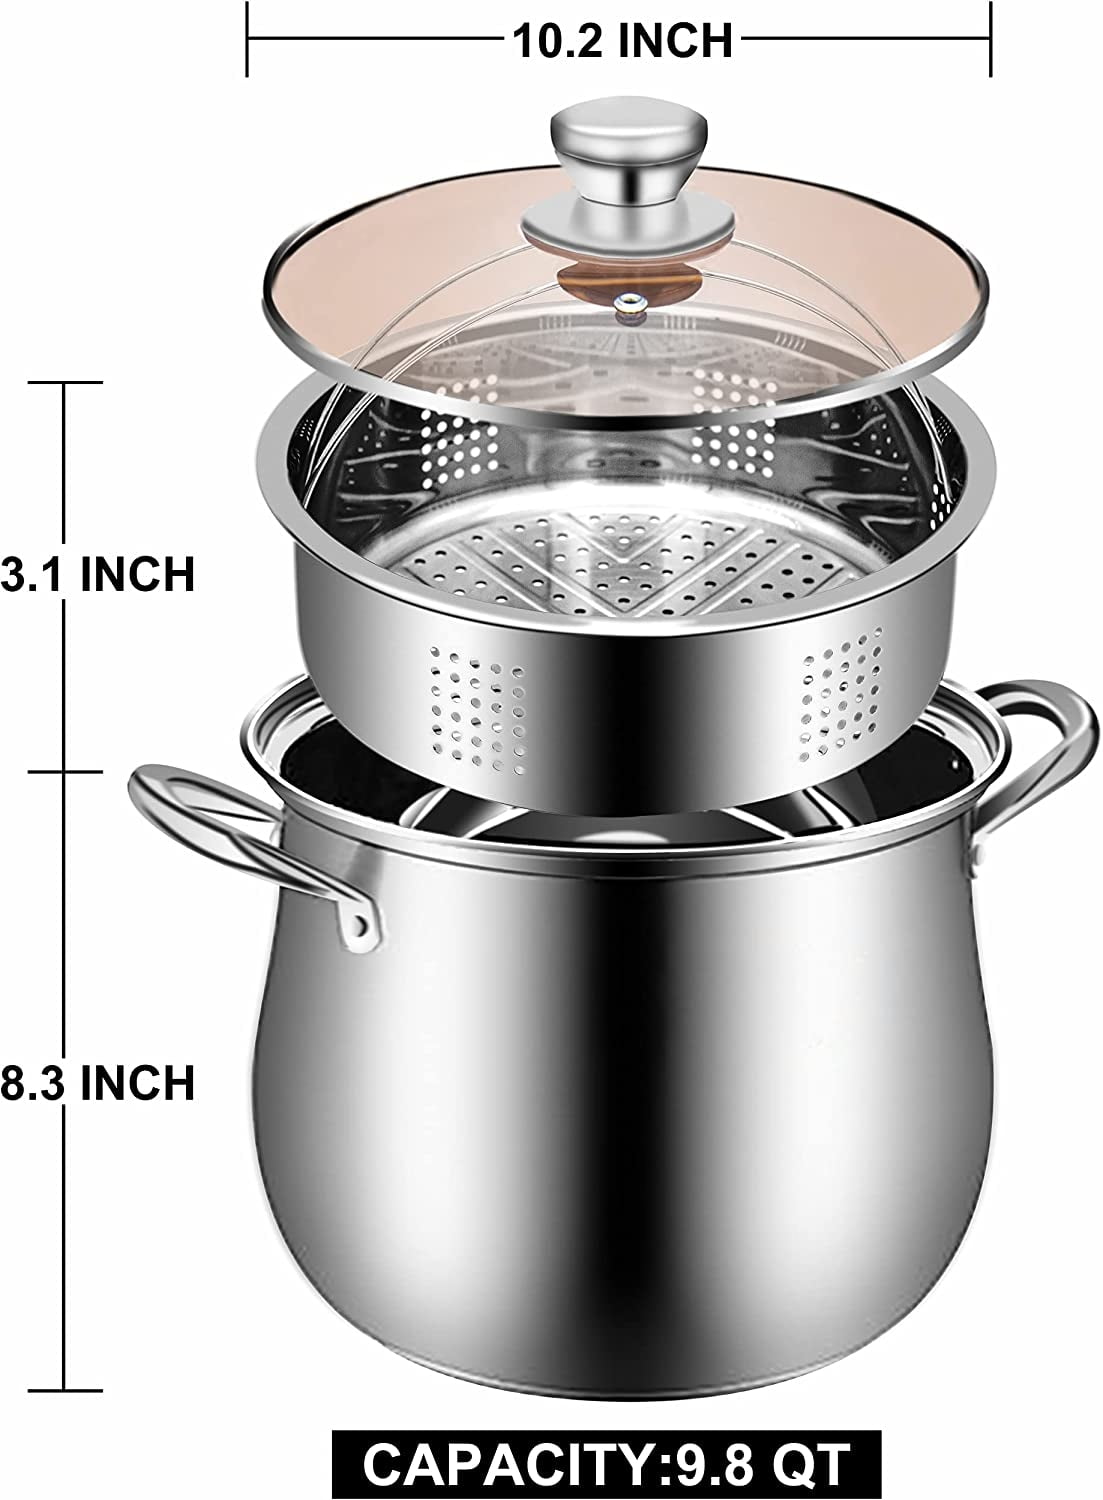 Pristine Stainless Steel 2 Pc Stock Pots Set 8 QT , 12 QT With LID